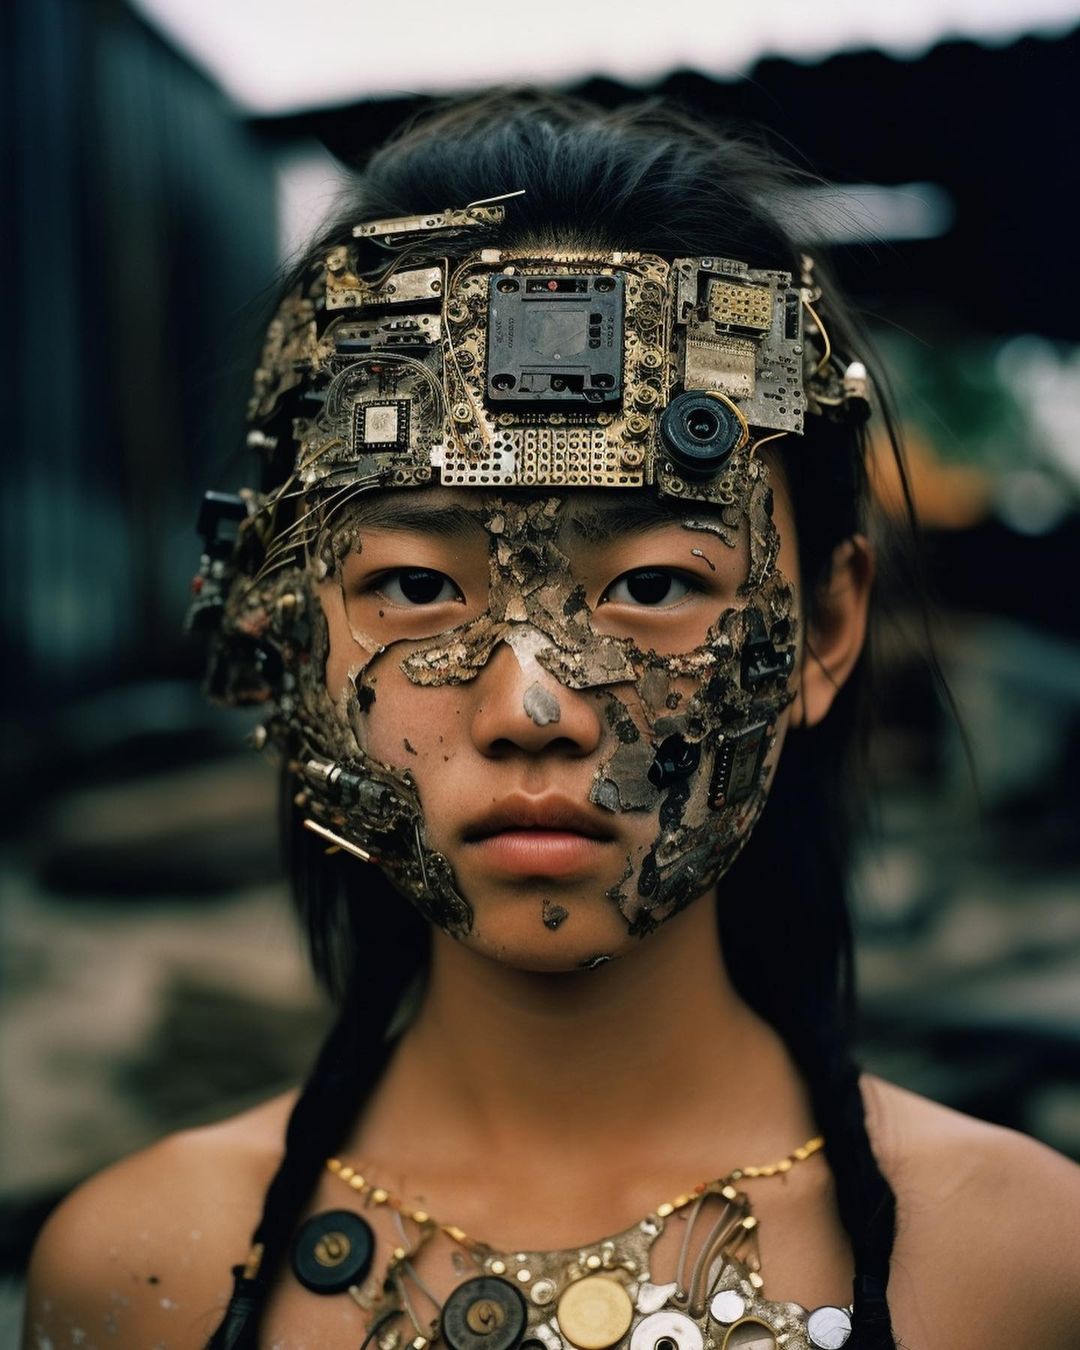 An AI-generated photographic portrait of a young girl with computer components and broken metallics fused to her face. 